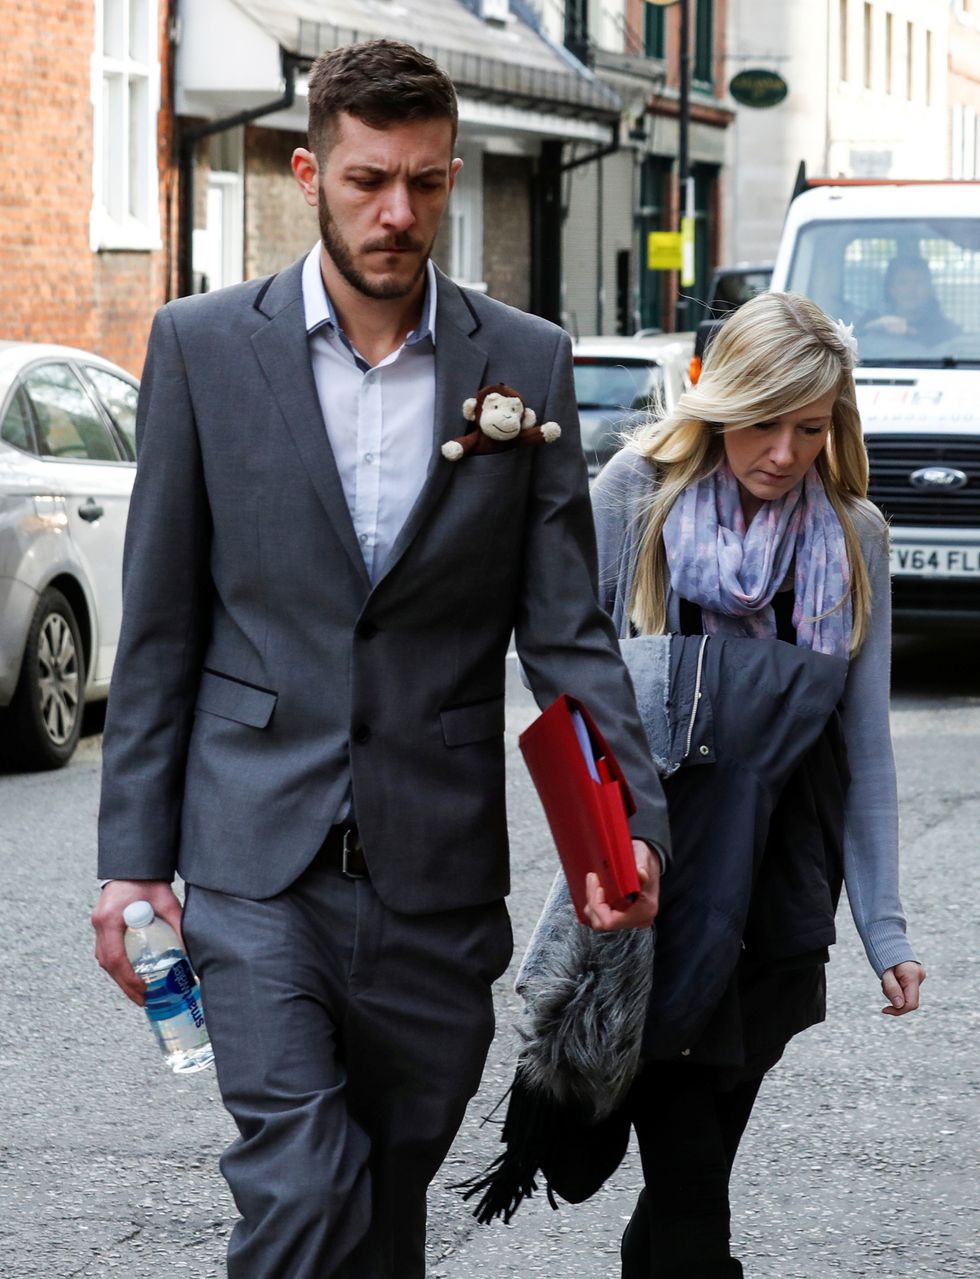 Why You Need To Care About Charlie Gard